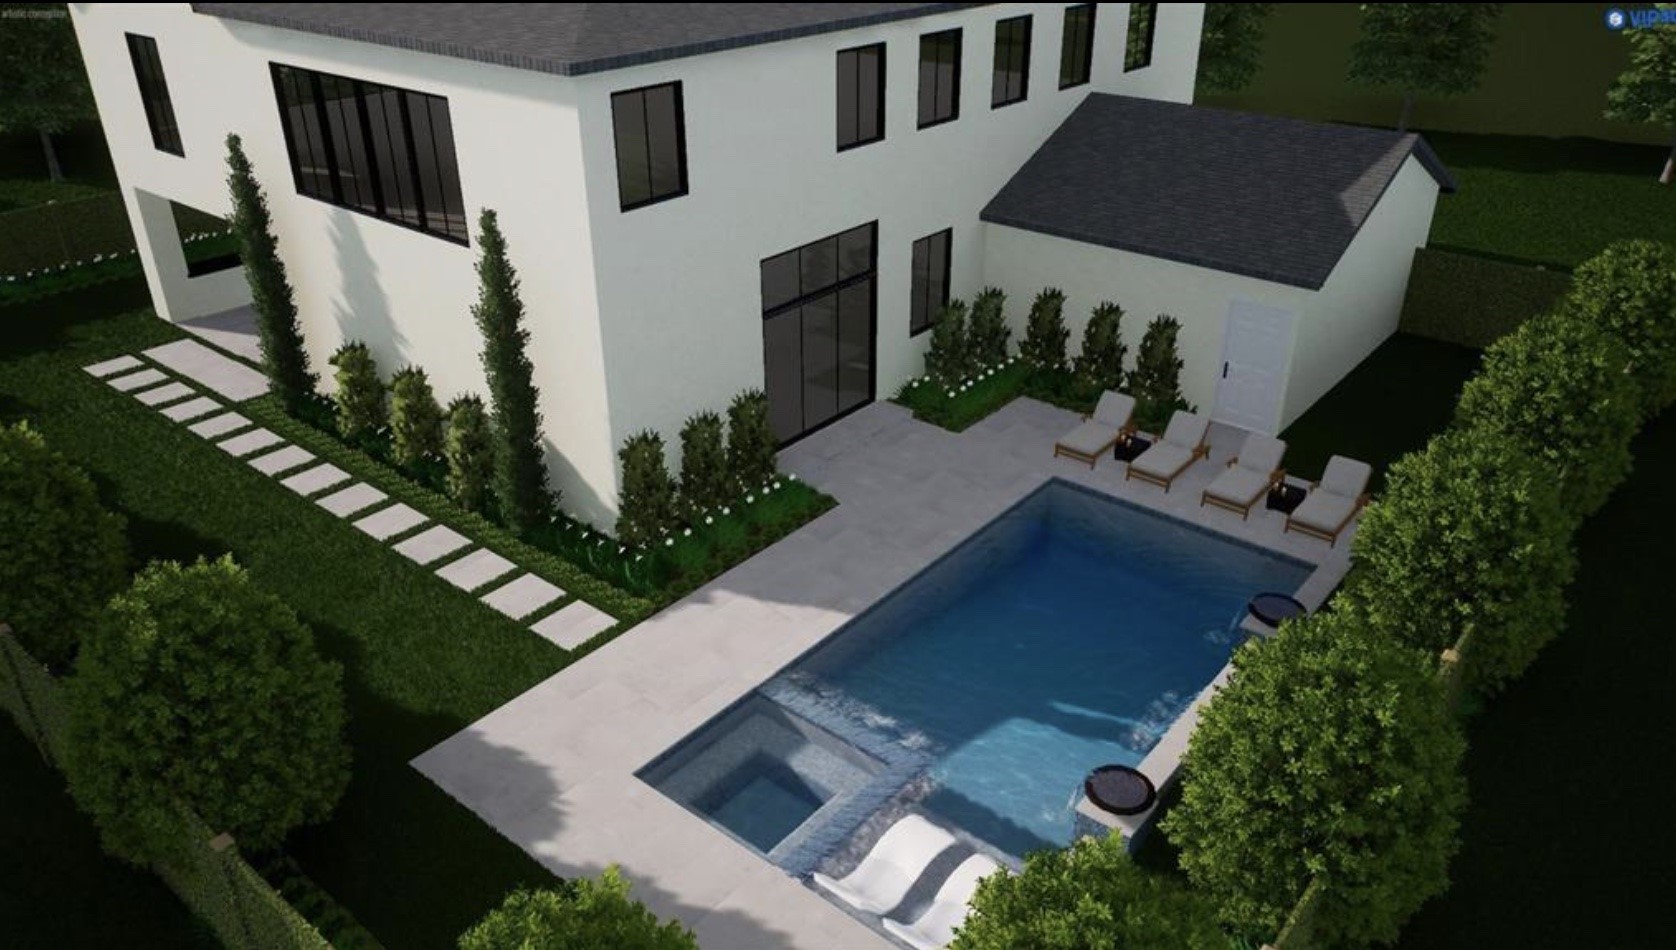 This expansive space not only invites relaxation but also provides ample room for the addition of a substantial pool. Enjoy the freedom to customize and create your own outdoor oasis, turning this backyard into a perfect retreat for both leisure and lively gatherings.